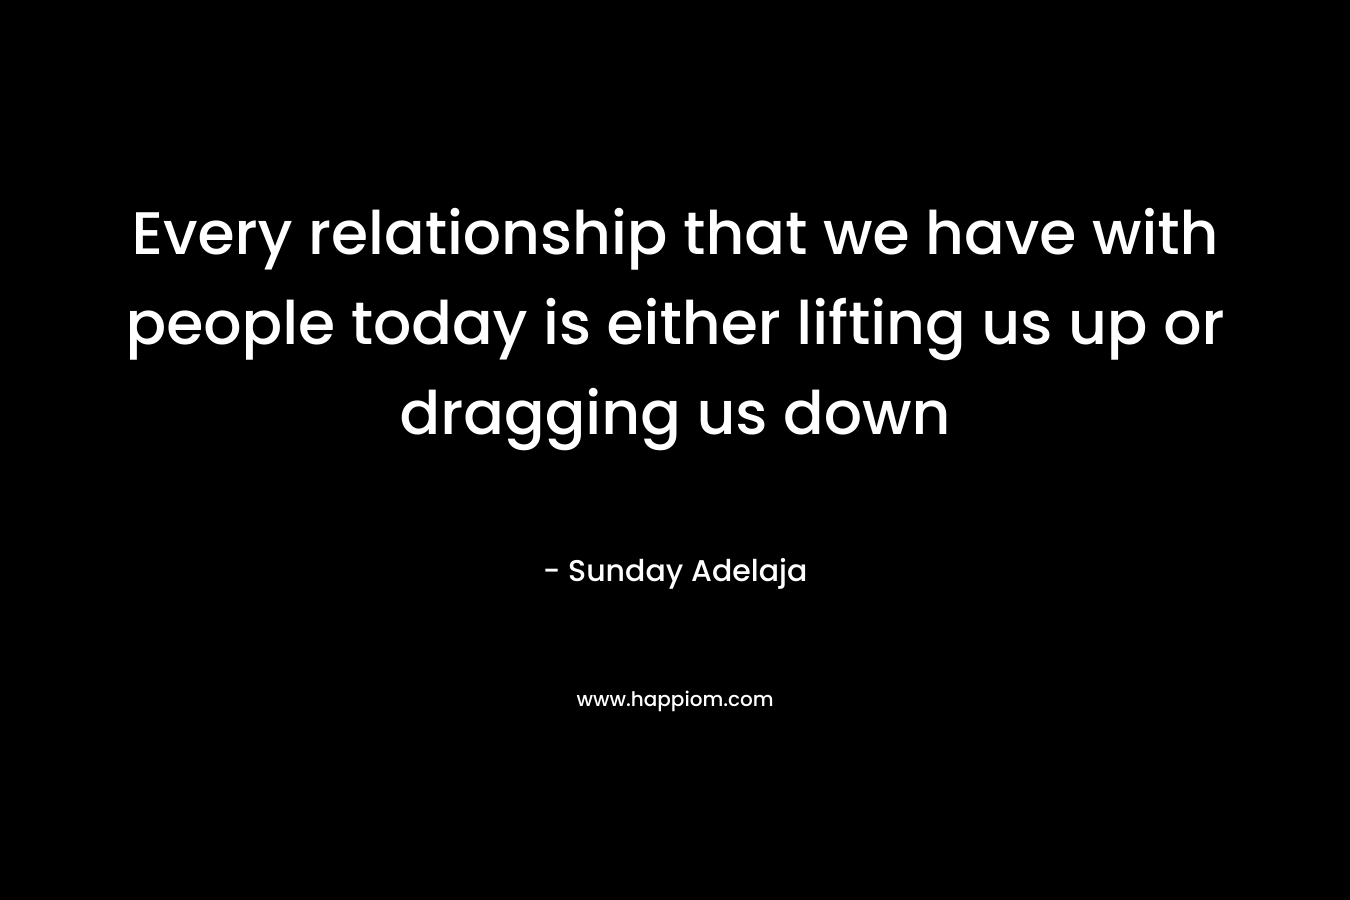 Every relationship that we have with people today is either lifting us up or dragging us down